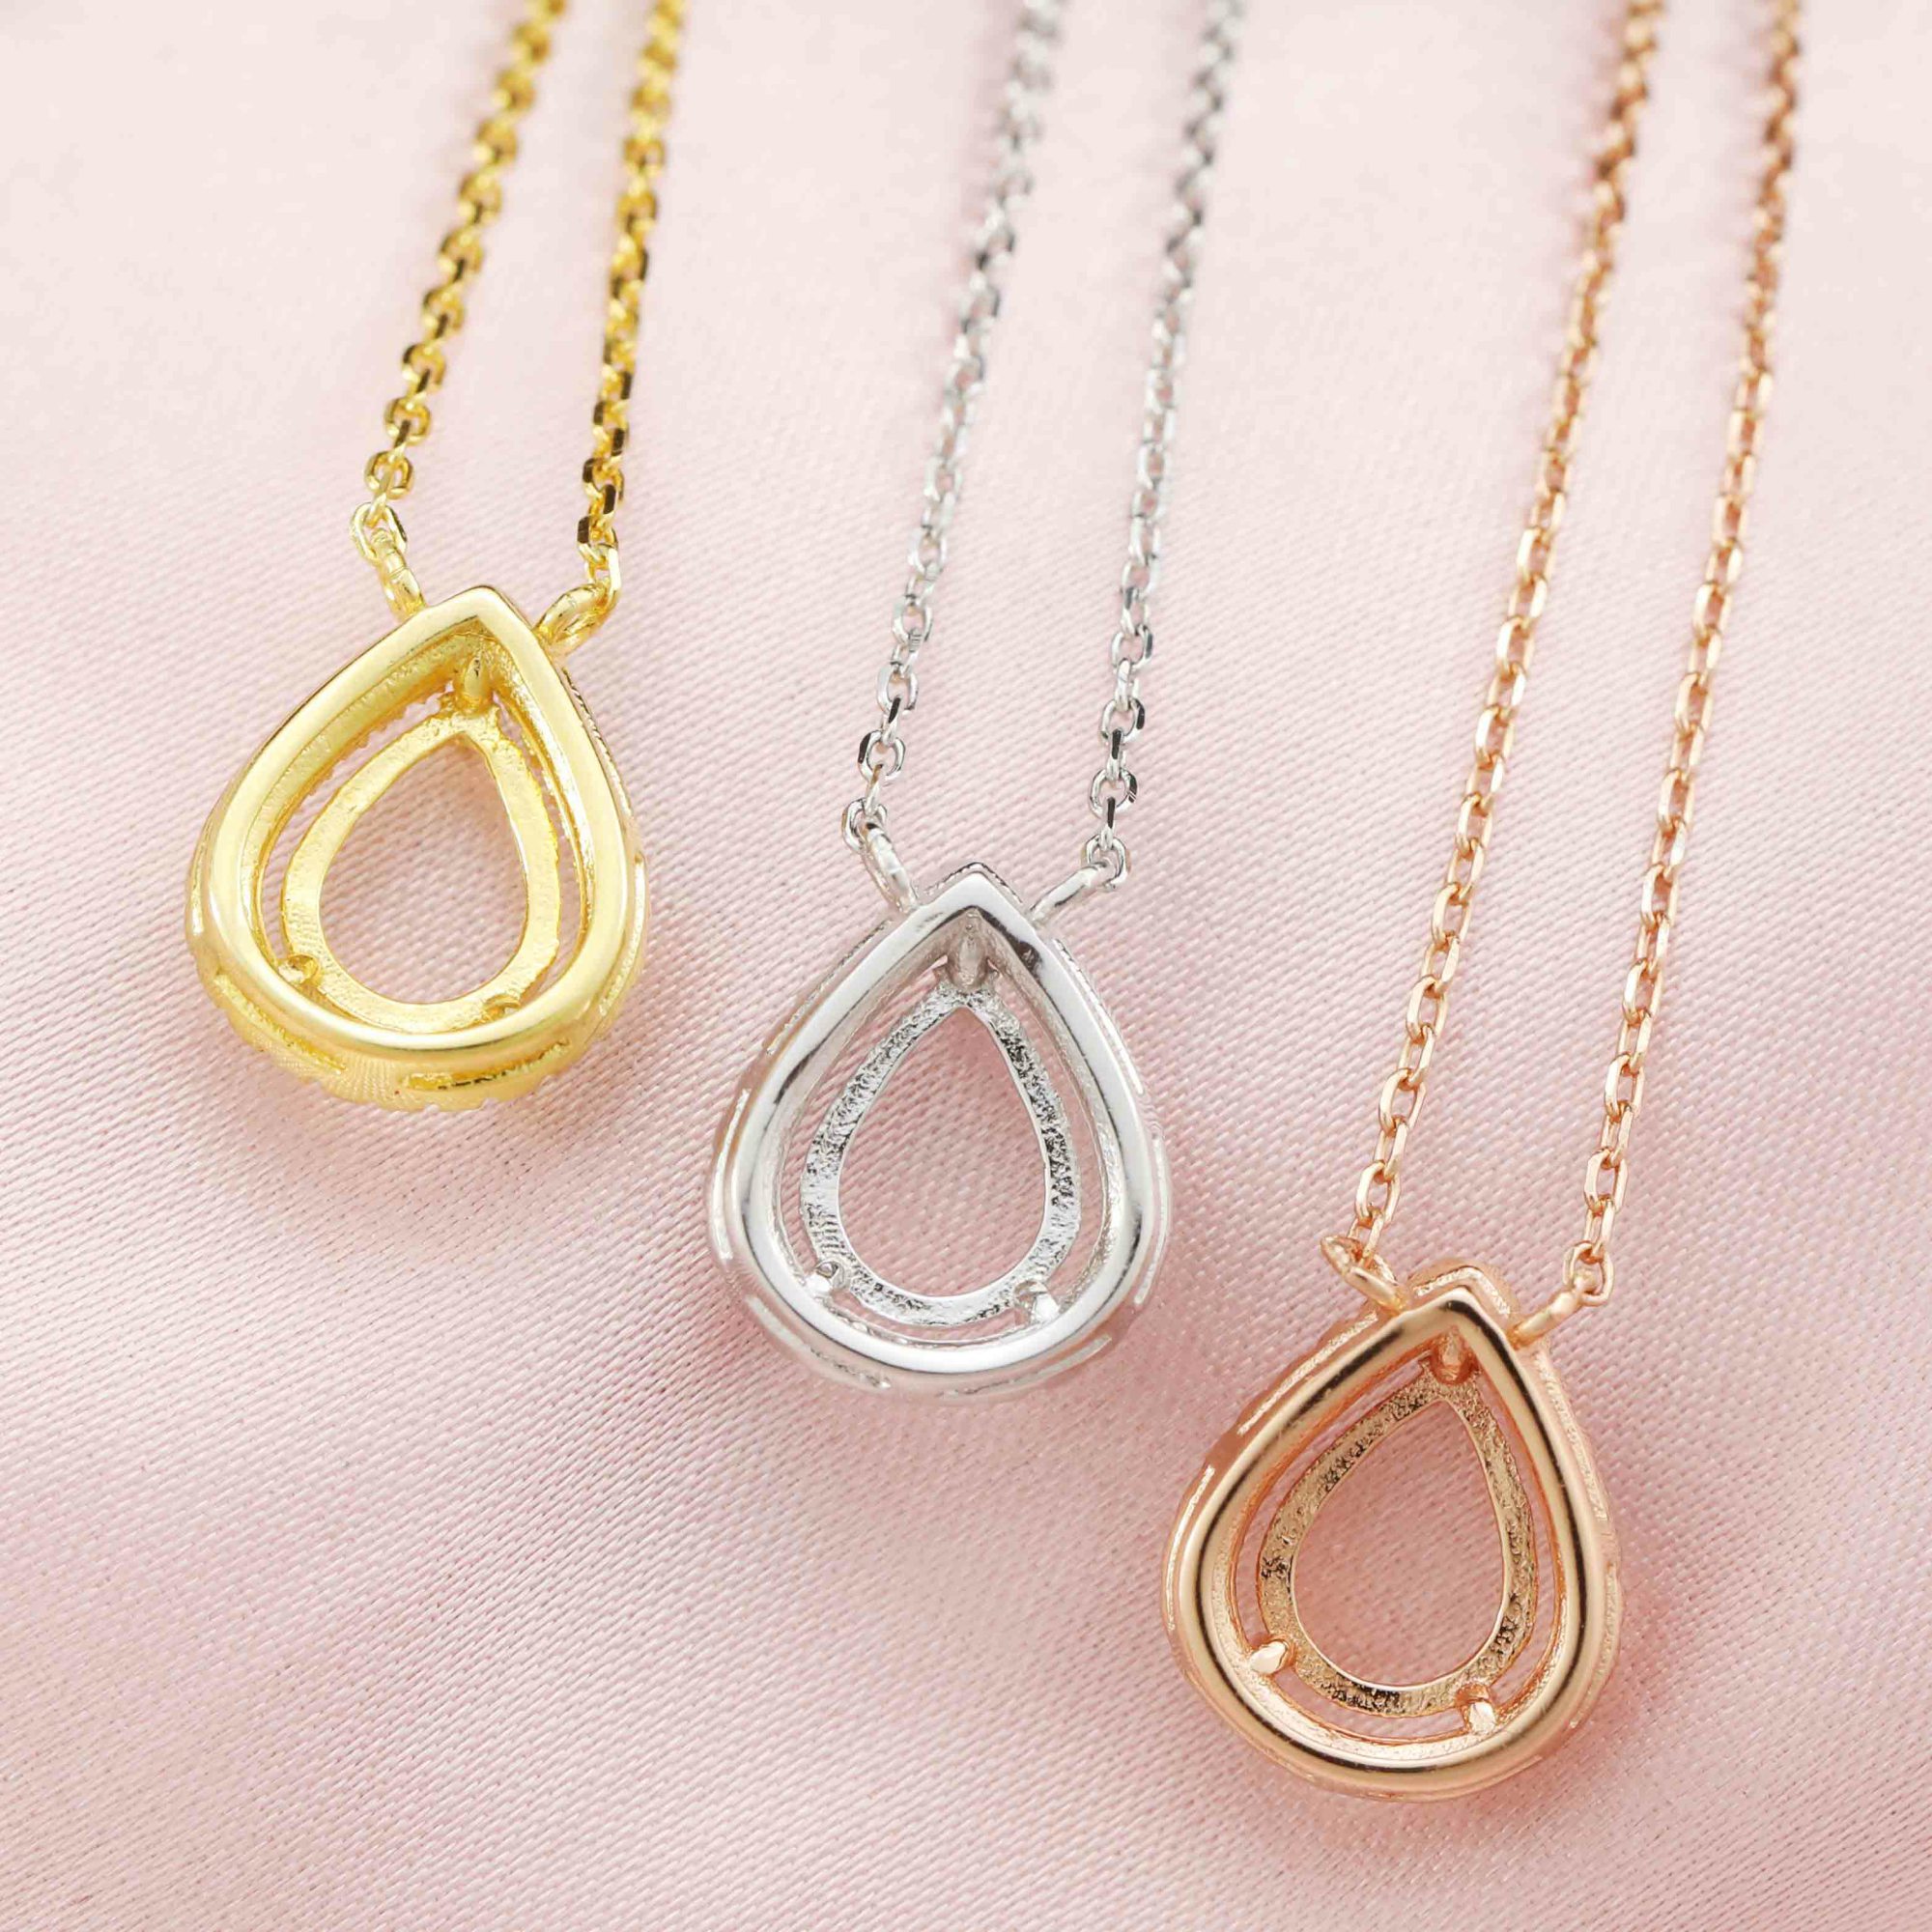 6x8MM Pear Prong Pendant Settings Solid 14K/18K Gold Halo Keepsake Breast Milk Bezel with Birthstone Accents Necklace Chain DIY Memory Jewelry Supplies 1431046-1 - Click Image to Close